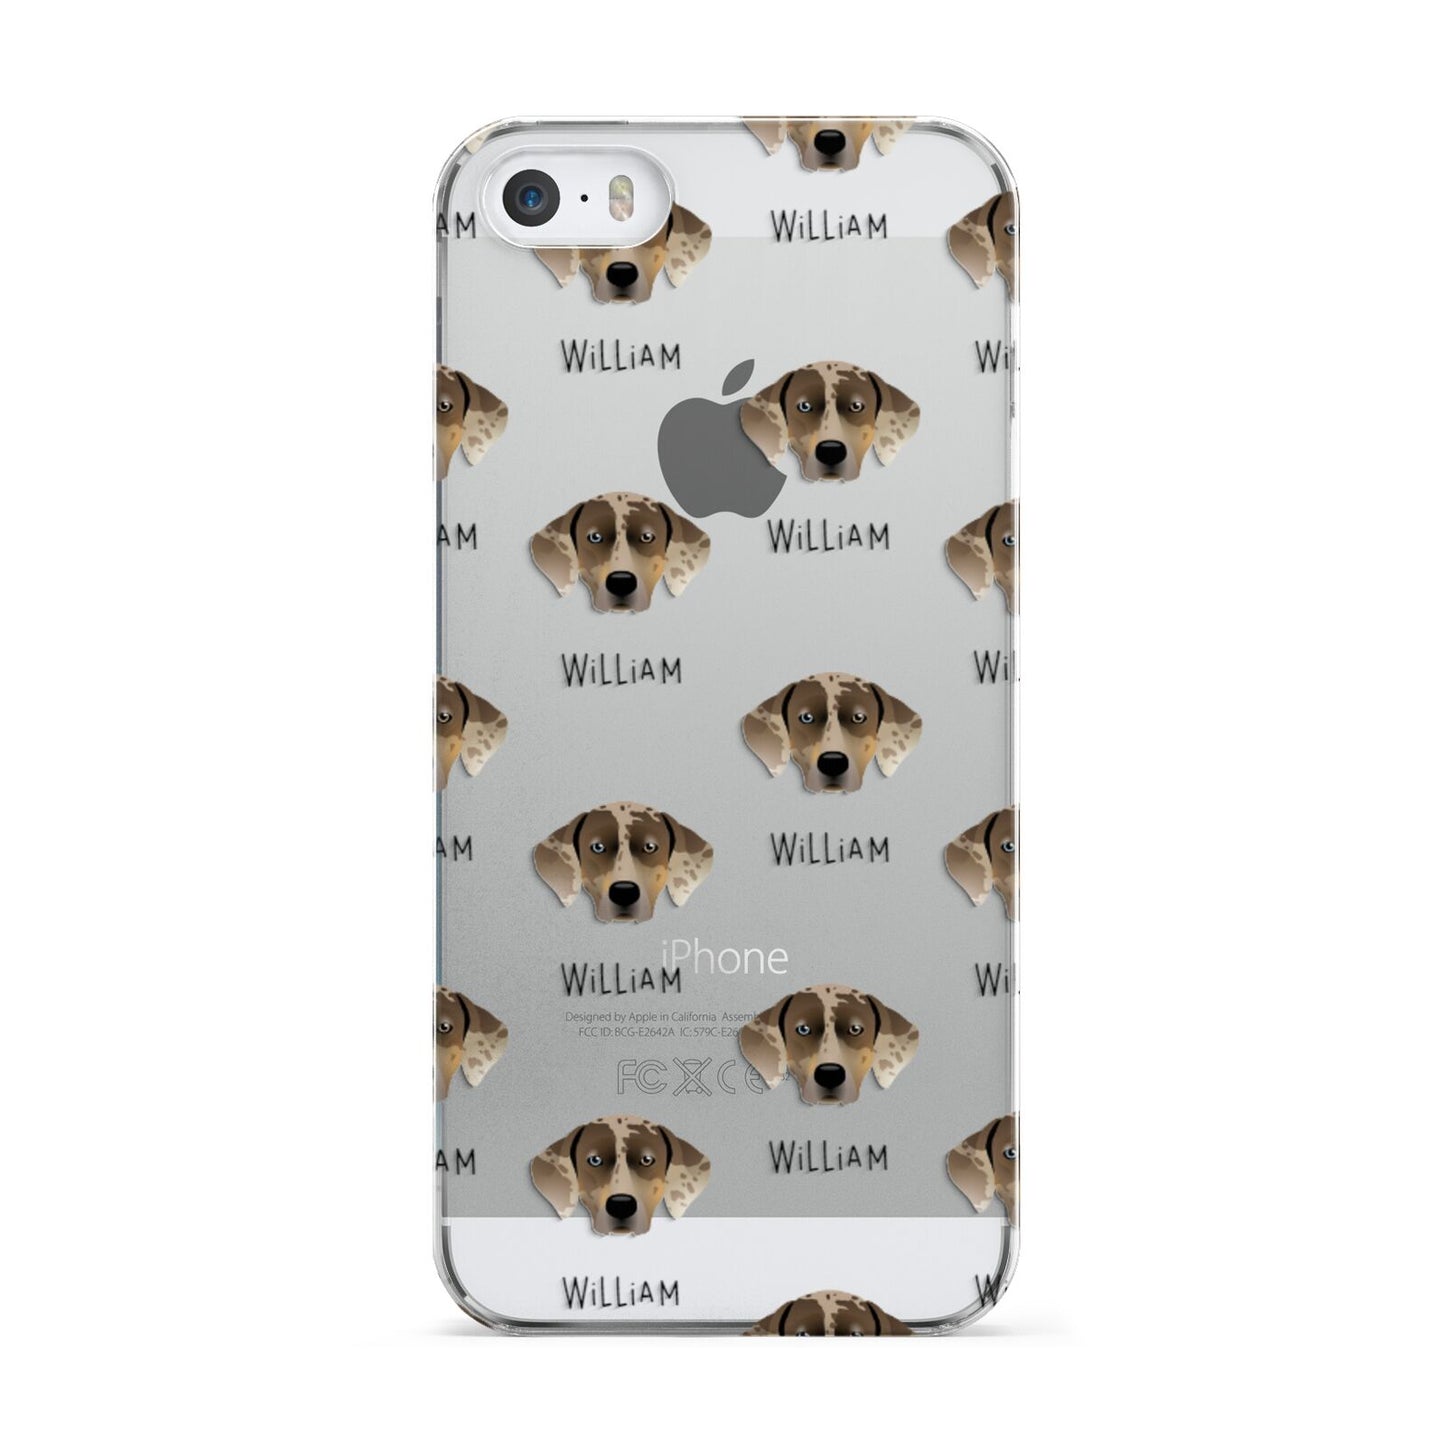 Catahoula Leopard Dog Icon with Name Apple iPhone 5 Case